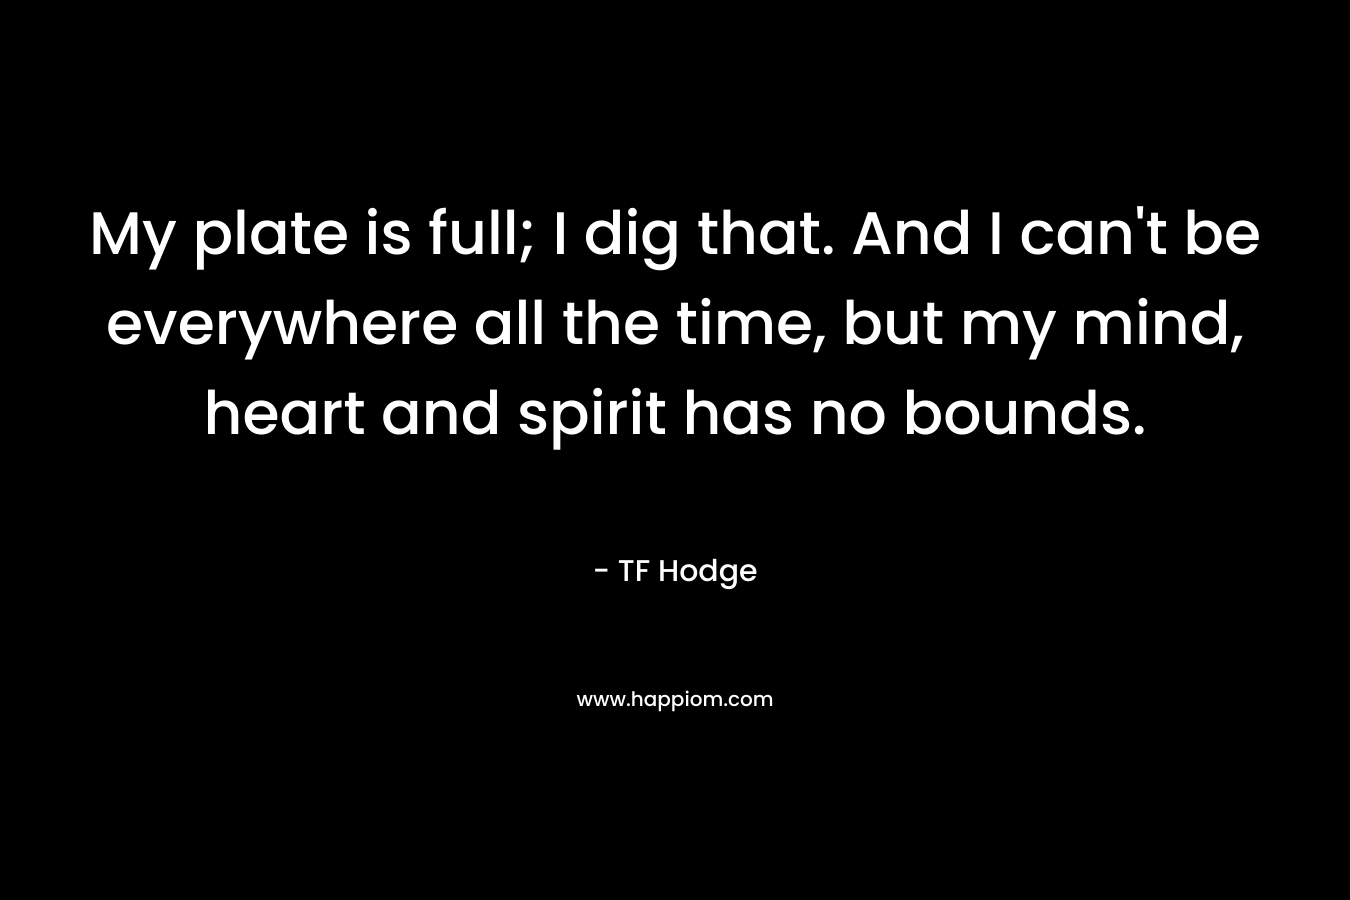 My plate is full; I dig that. And I can’t be everywhere all the time, but my mind, heart and spirit has no bounds. – TF Hodge